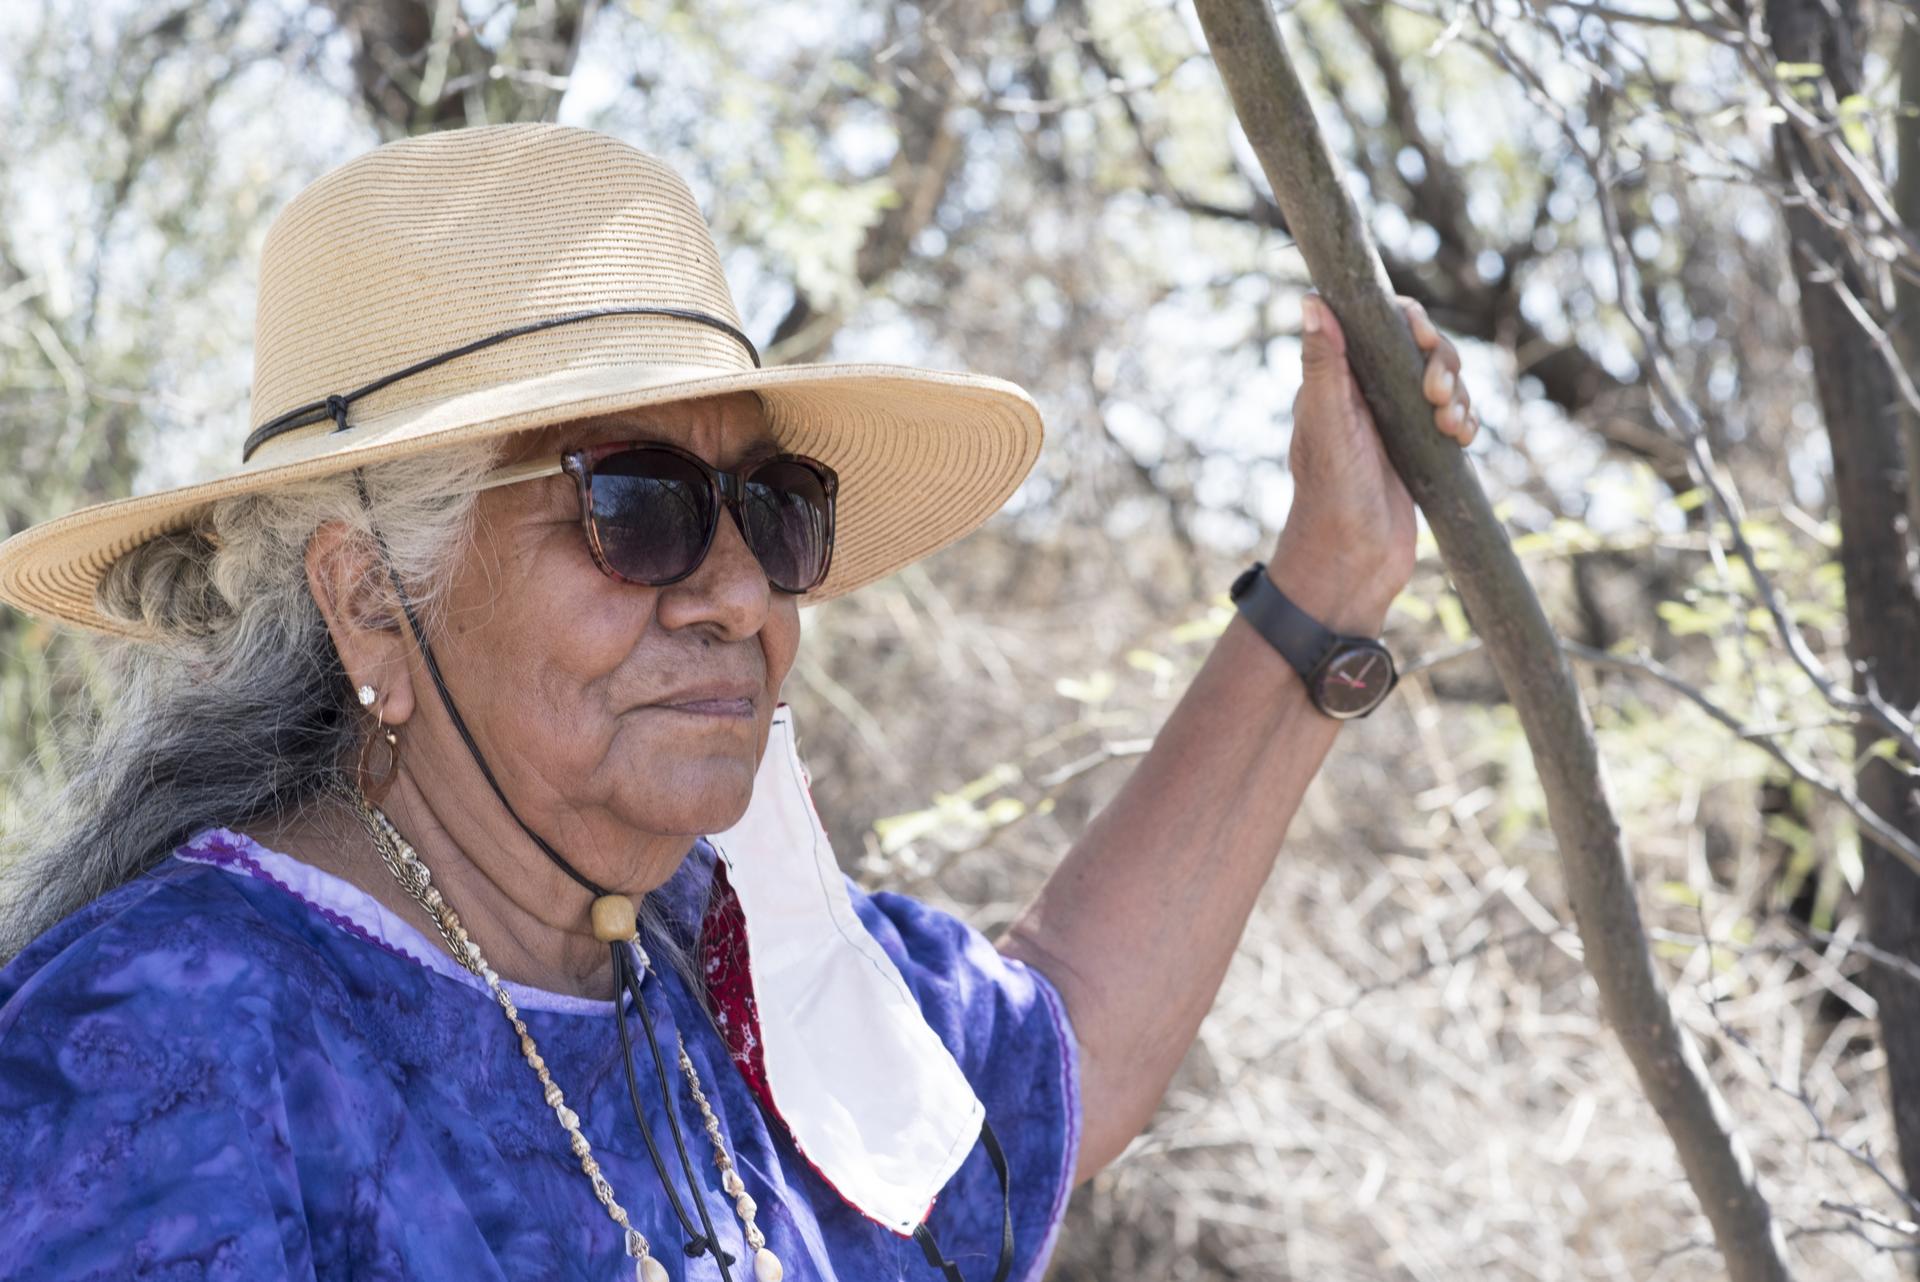 Lorraine Marquez Eiler’s one of about 100 Hia-Ced O’odham tribal members who once lived in Darby Wells, a village a little over 30 miles north of the Arizona-Mexico border. Nobody lives there anymore.